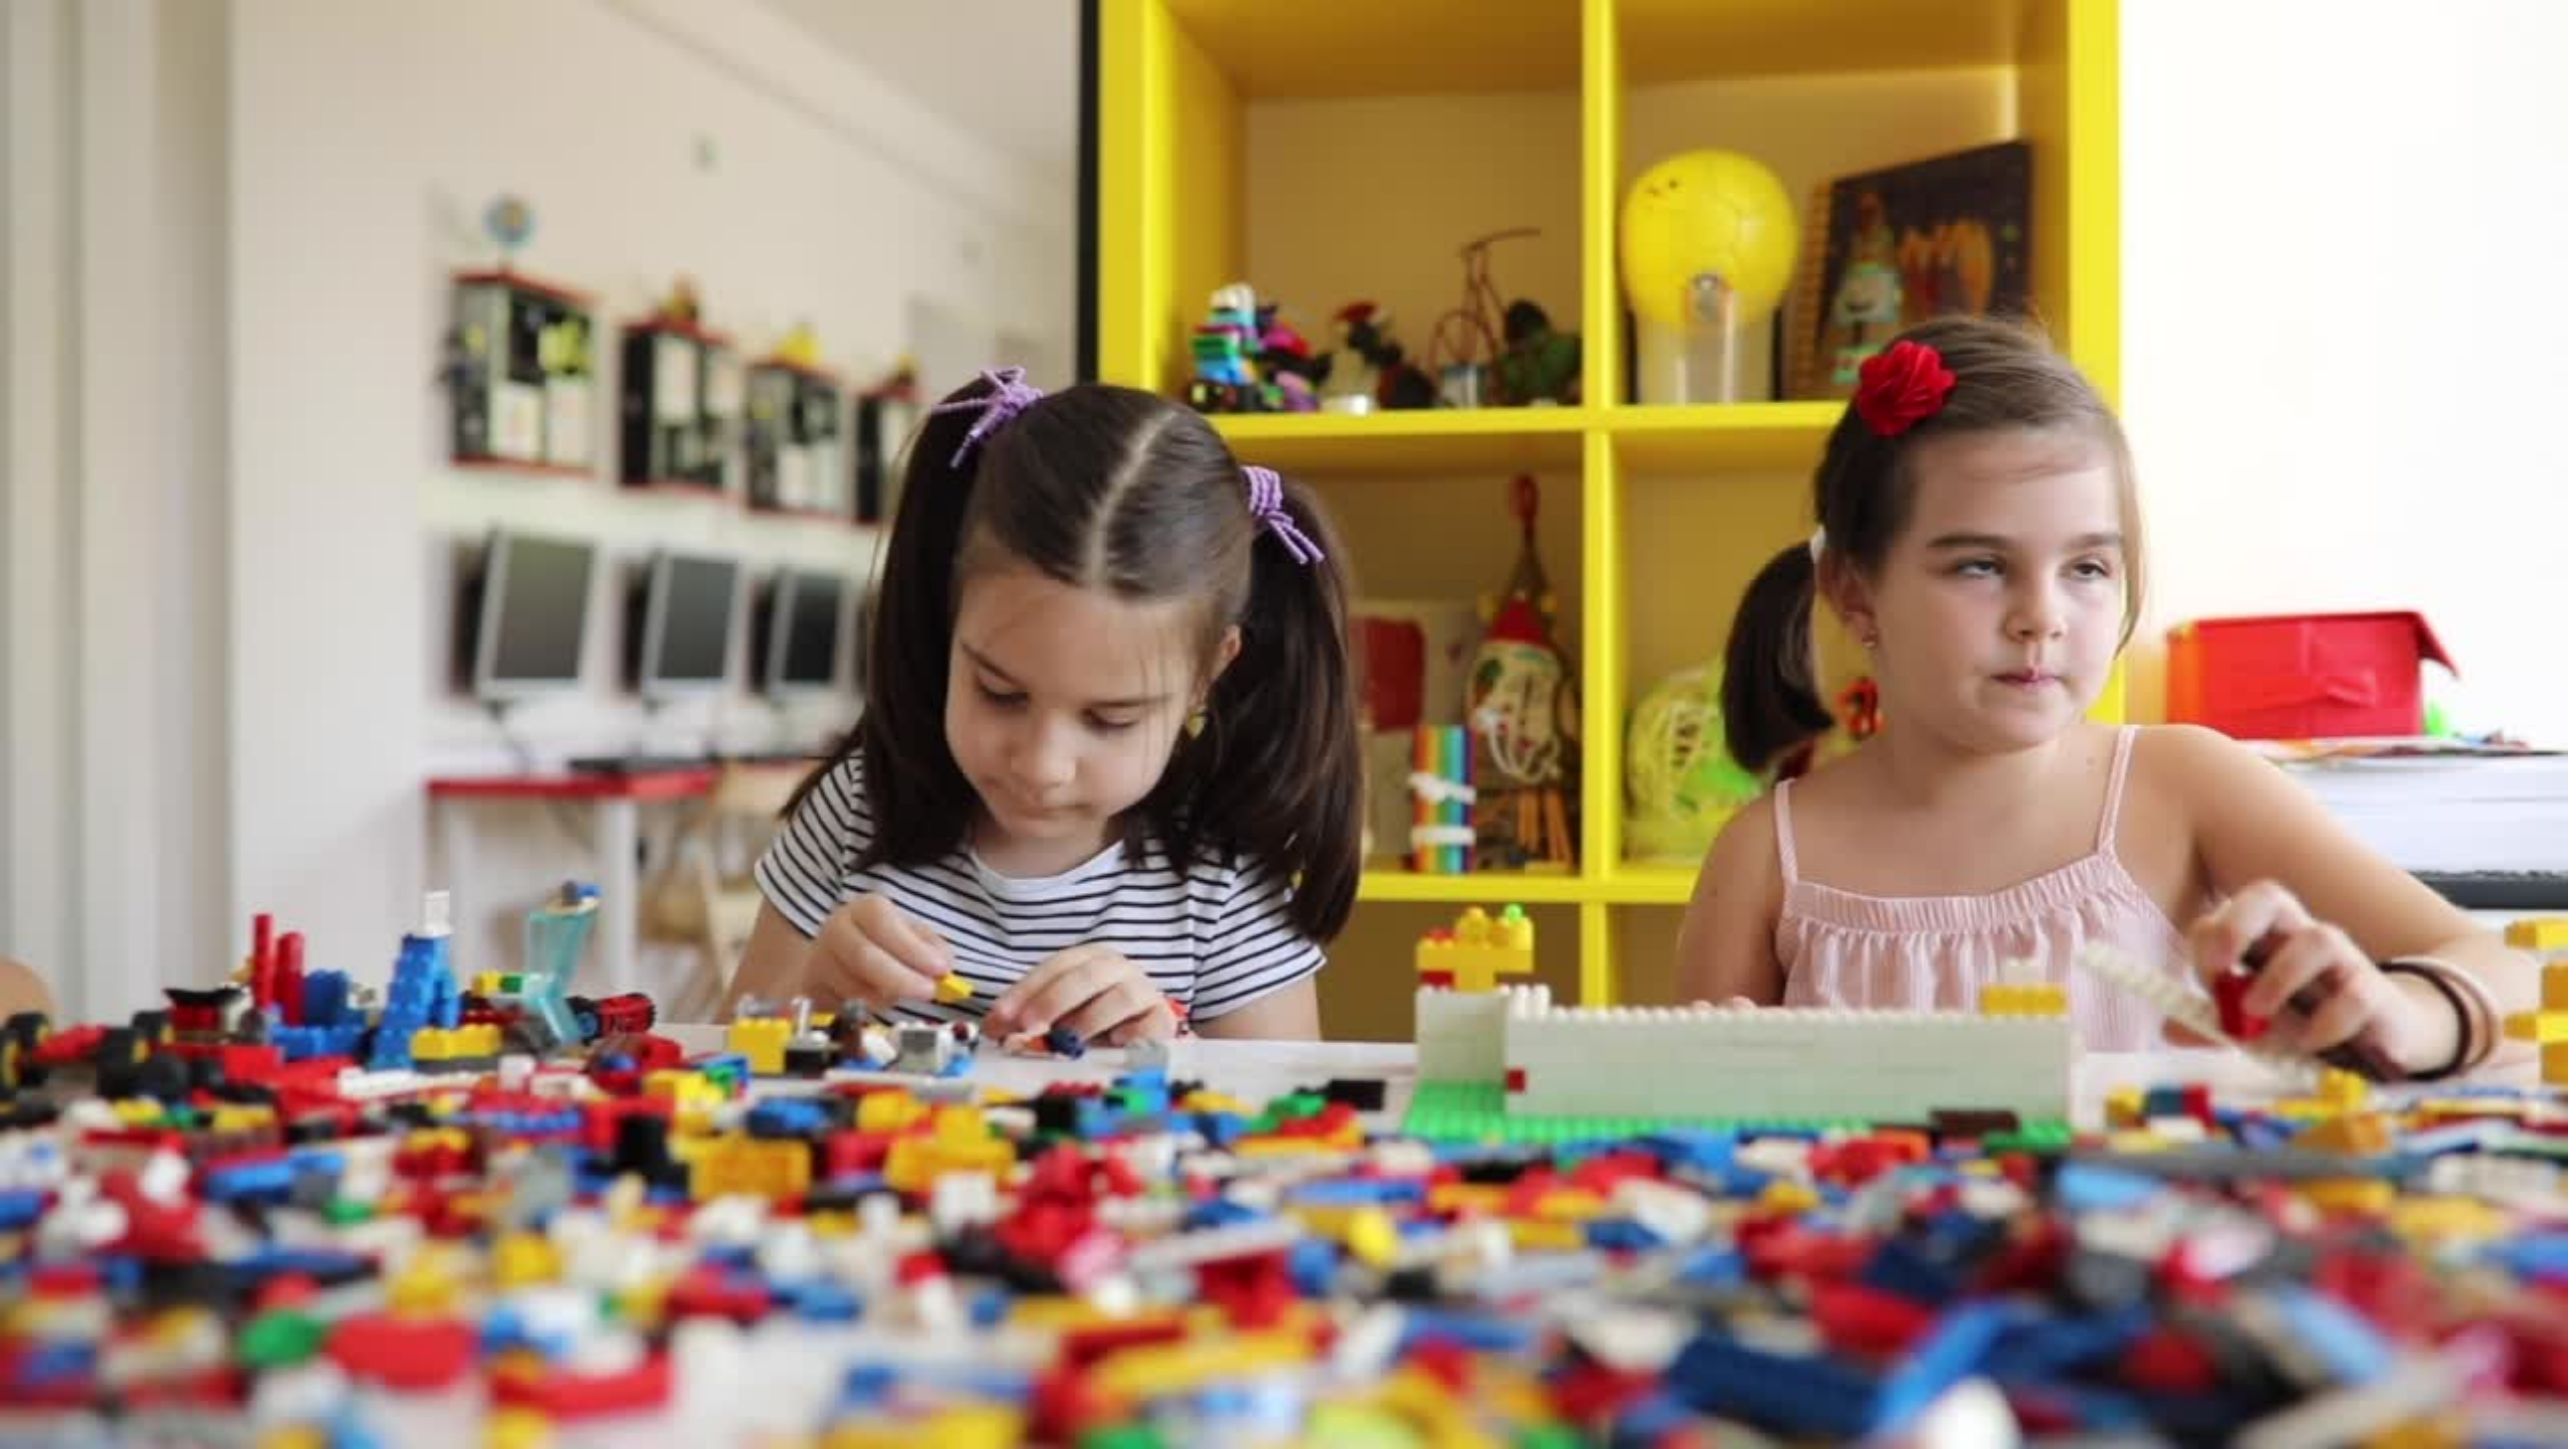 Women in STEM with LEGO